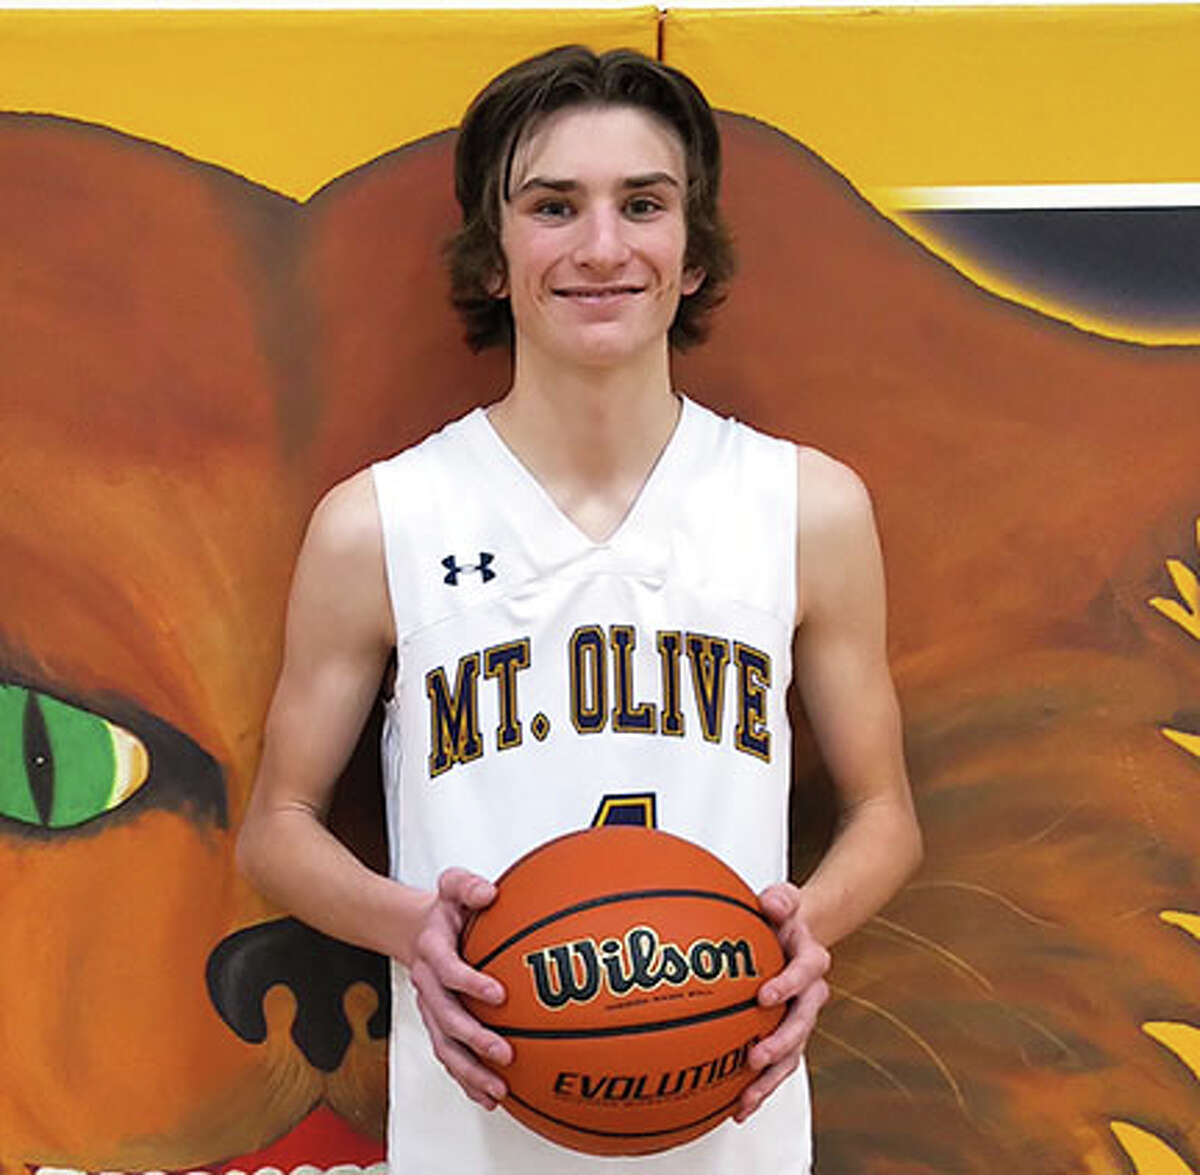 Mount Olive's Trent Markezich scored his 1,000th career point for the Wildcats on Friday night.